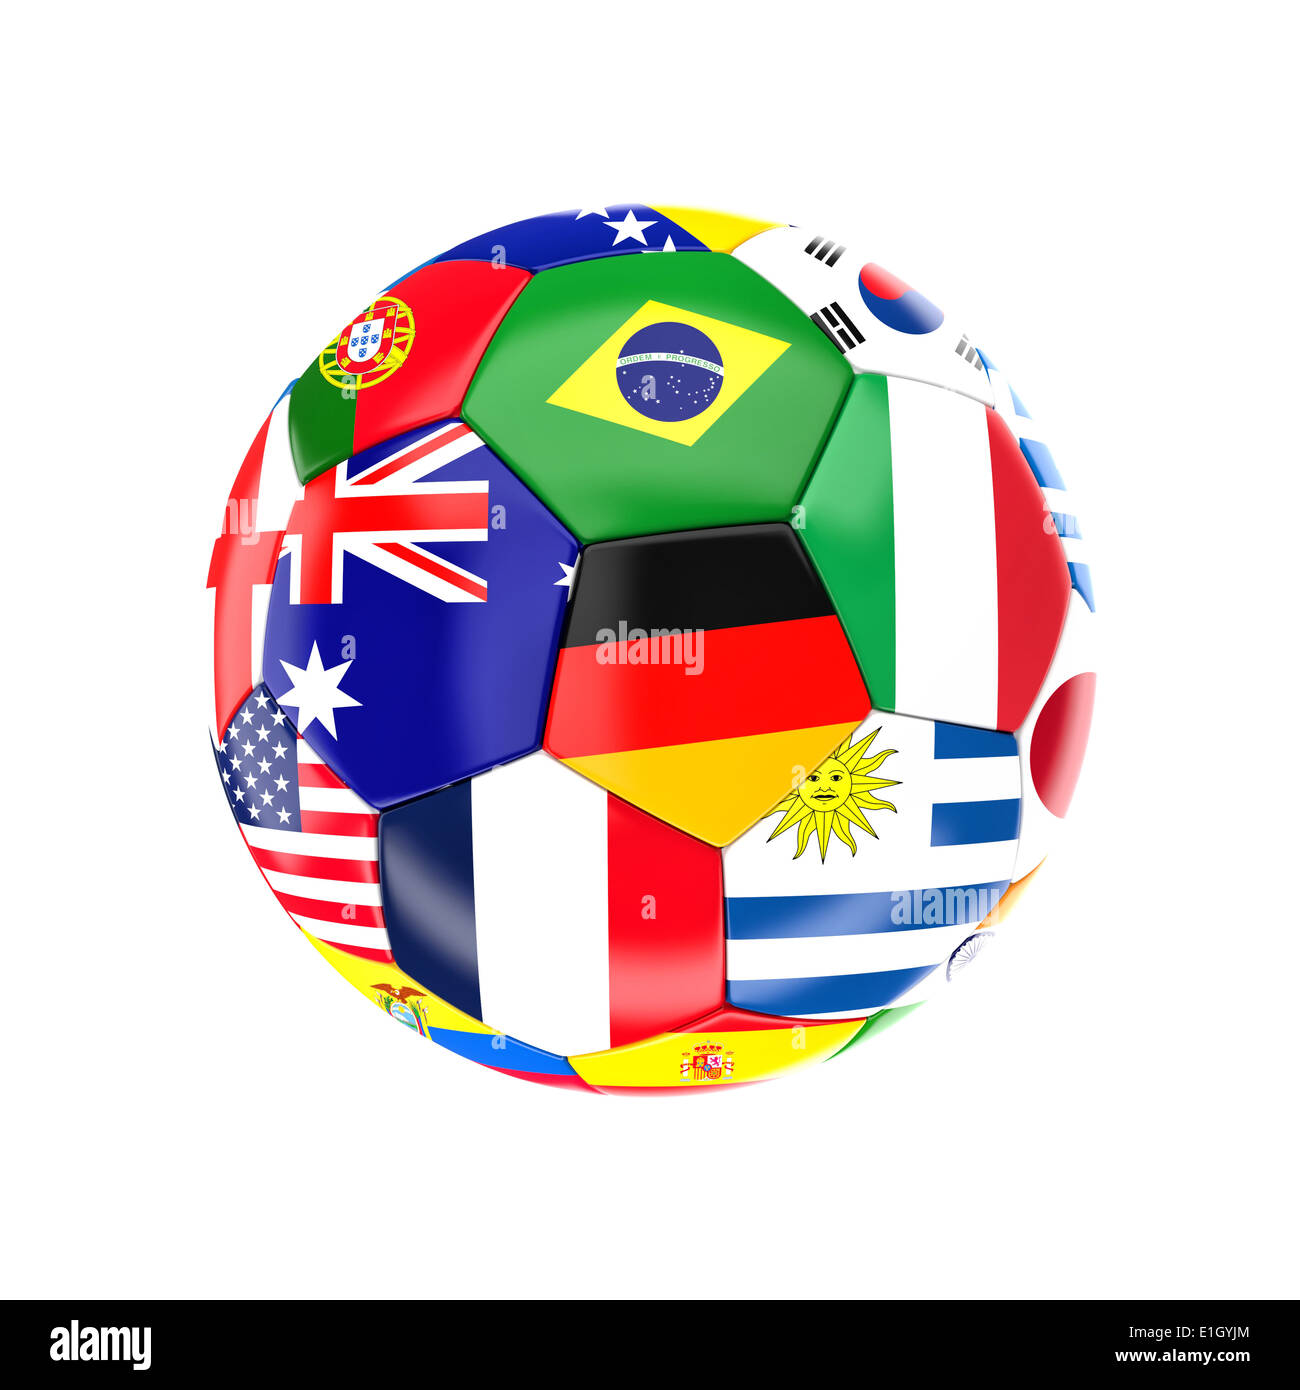 different country soccer ball 3d image on white Stock Photo